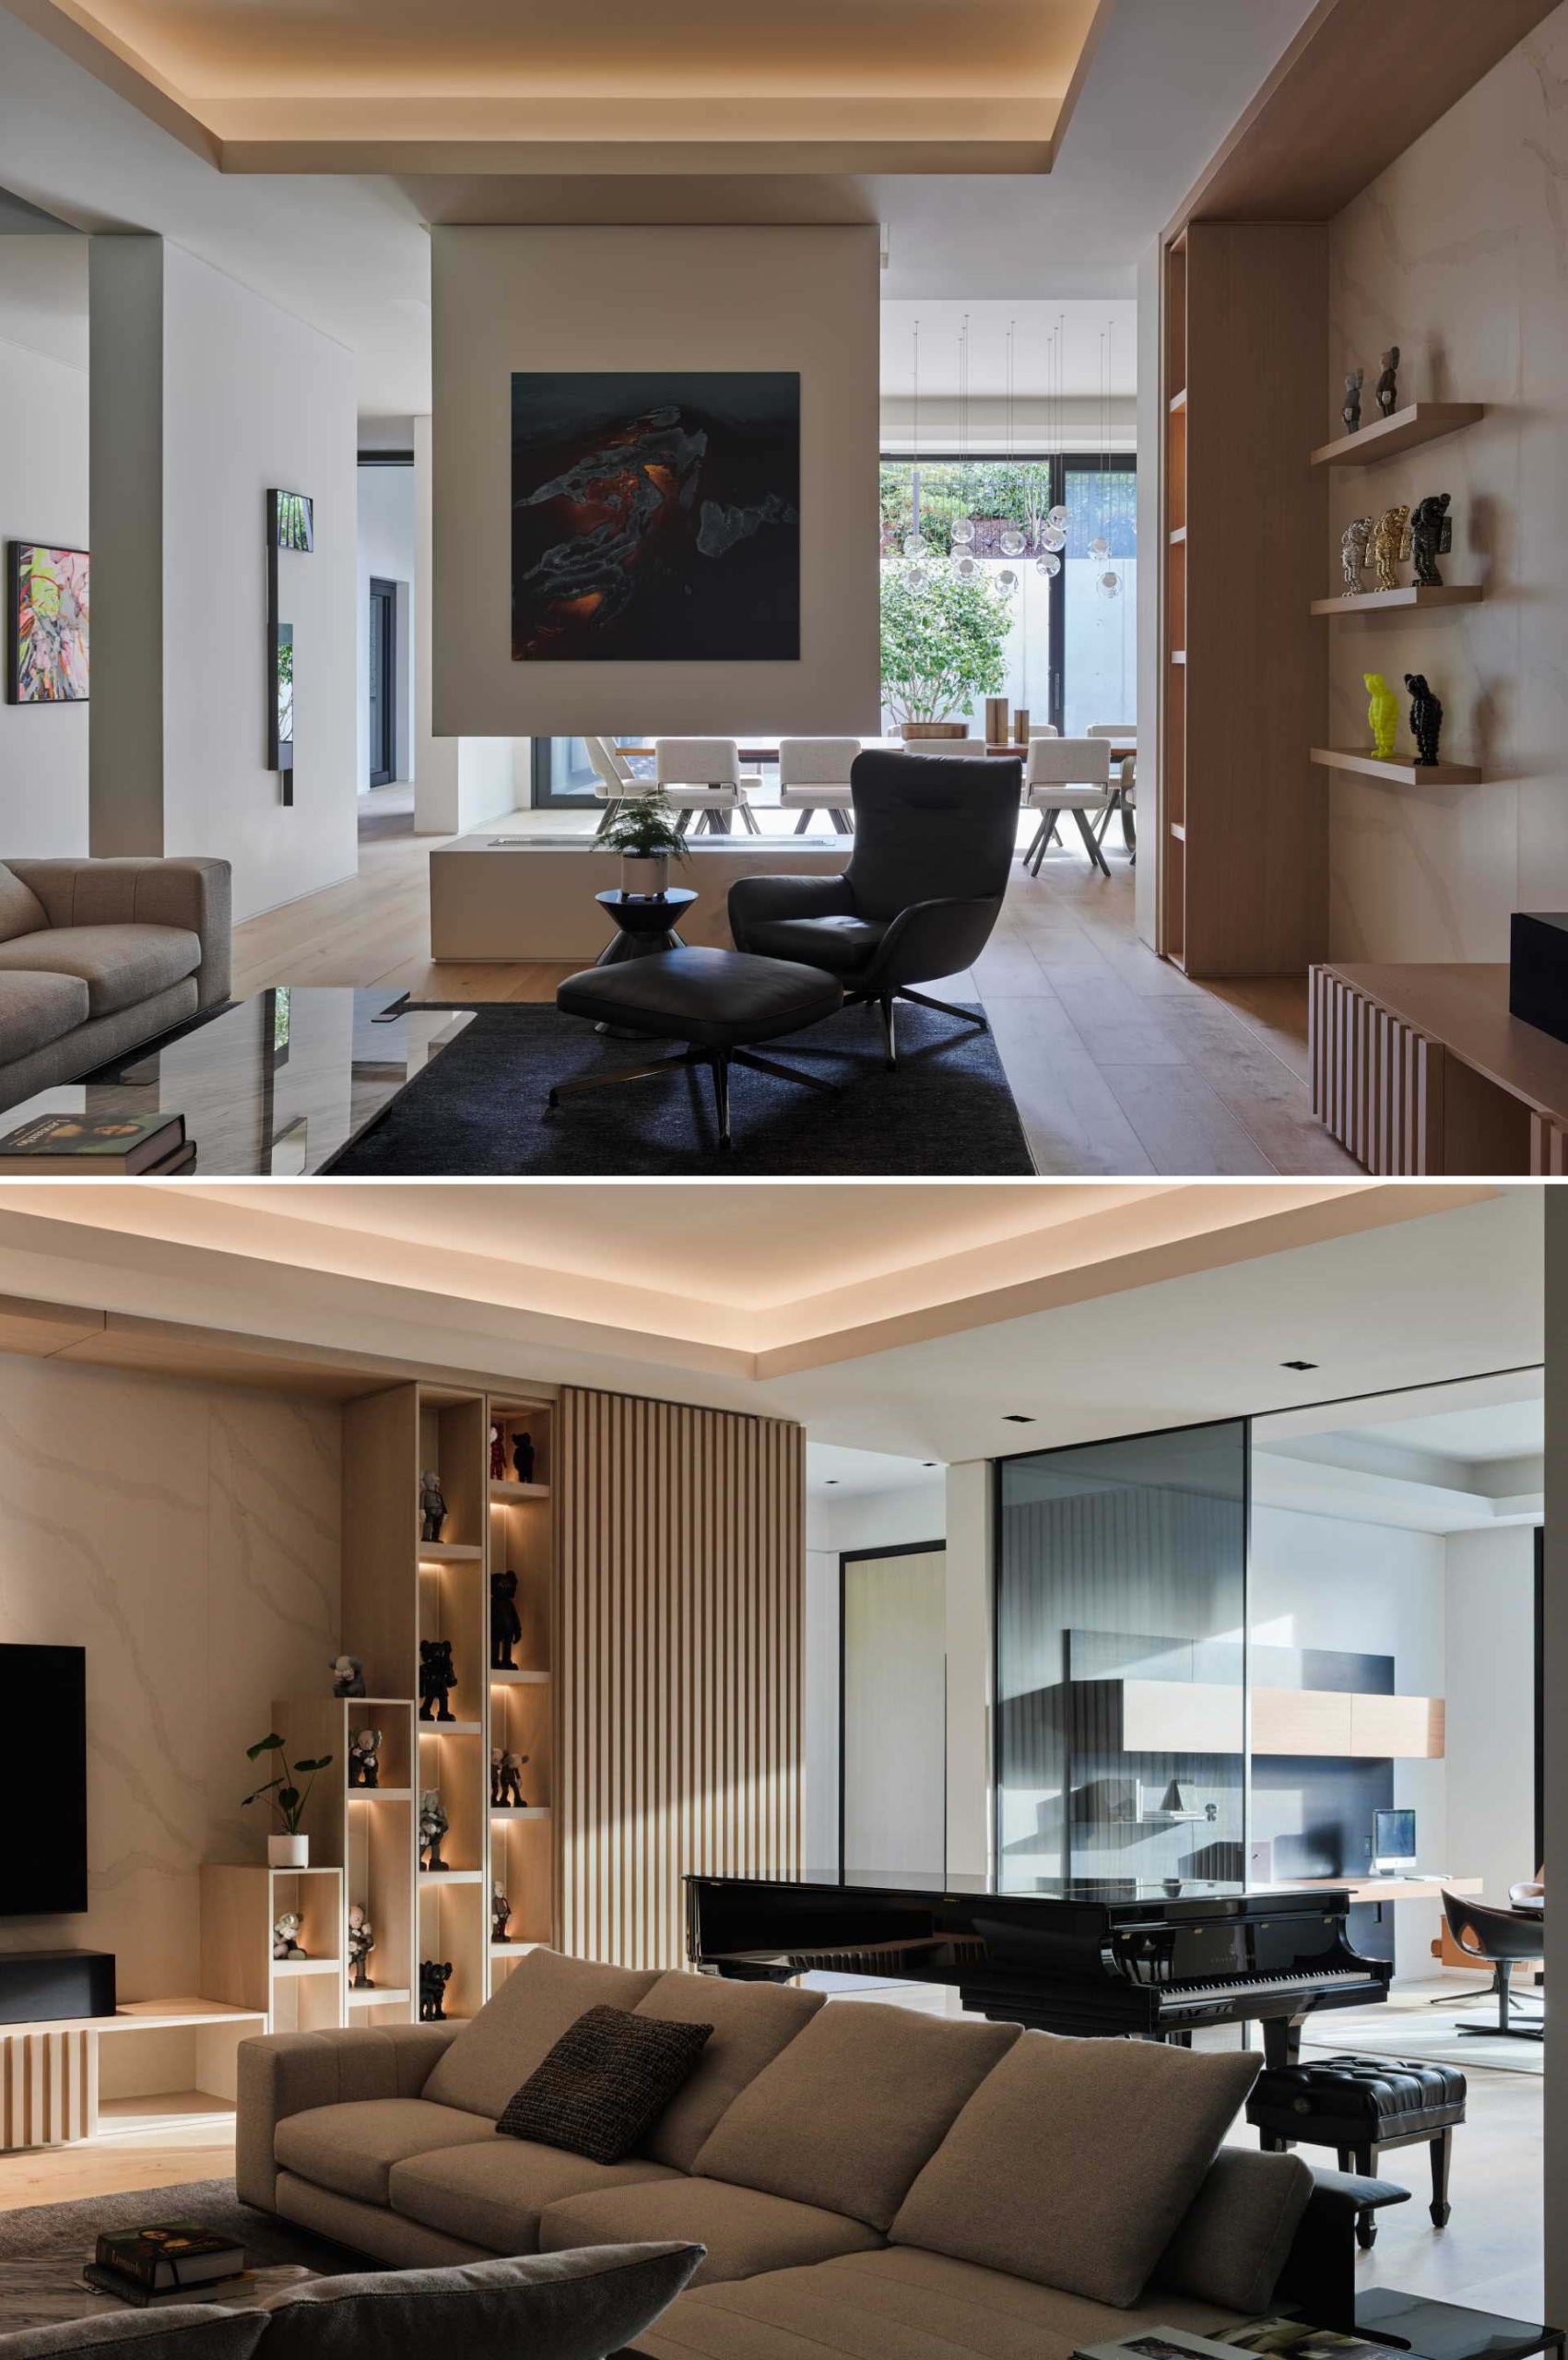 This modern living room includes display shelves, and a fireplace at one end. The other end is home to a piano.